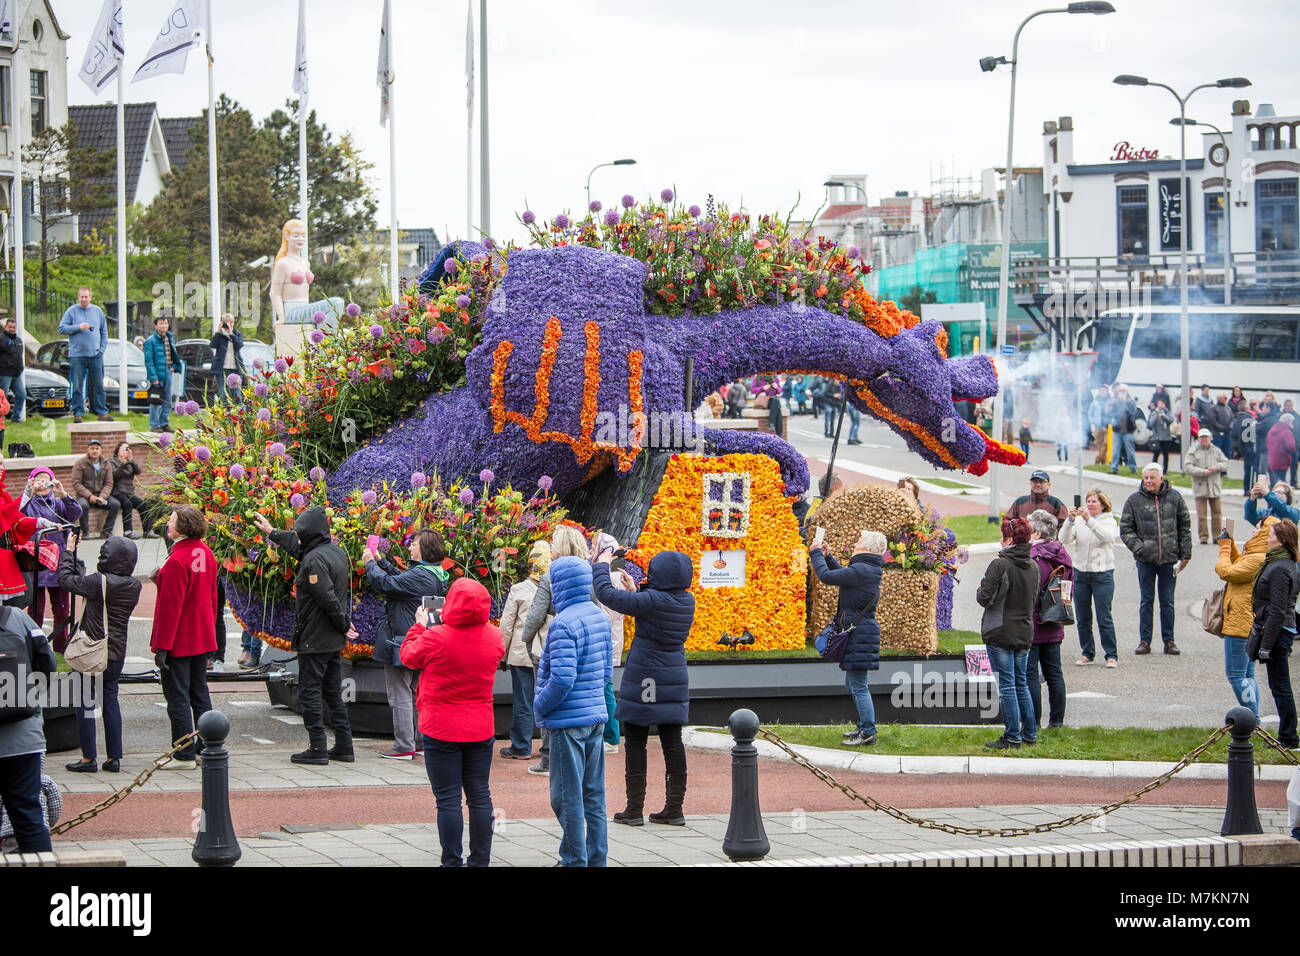 NORDWIJK, THE NETHERLANDS - APRIL 22, 2017: The Flower parade, Bloemencorso in Dutch, is an annual, colorful feast of beautiful flowers. The route is  Stock Photo